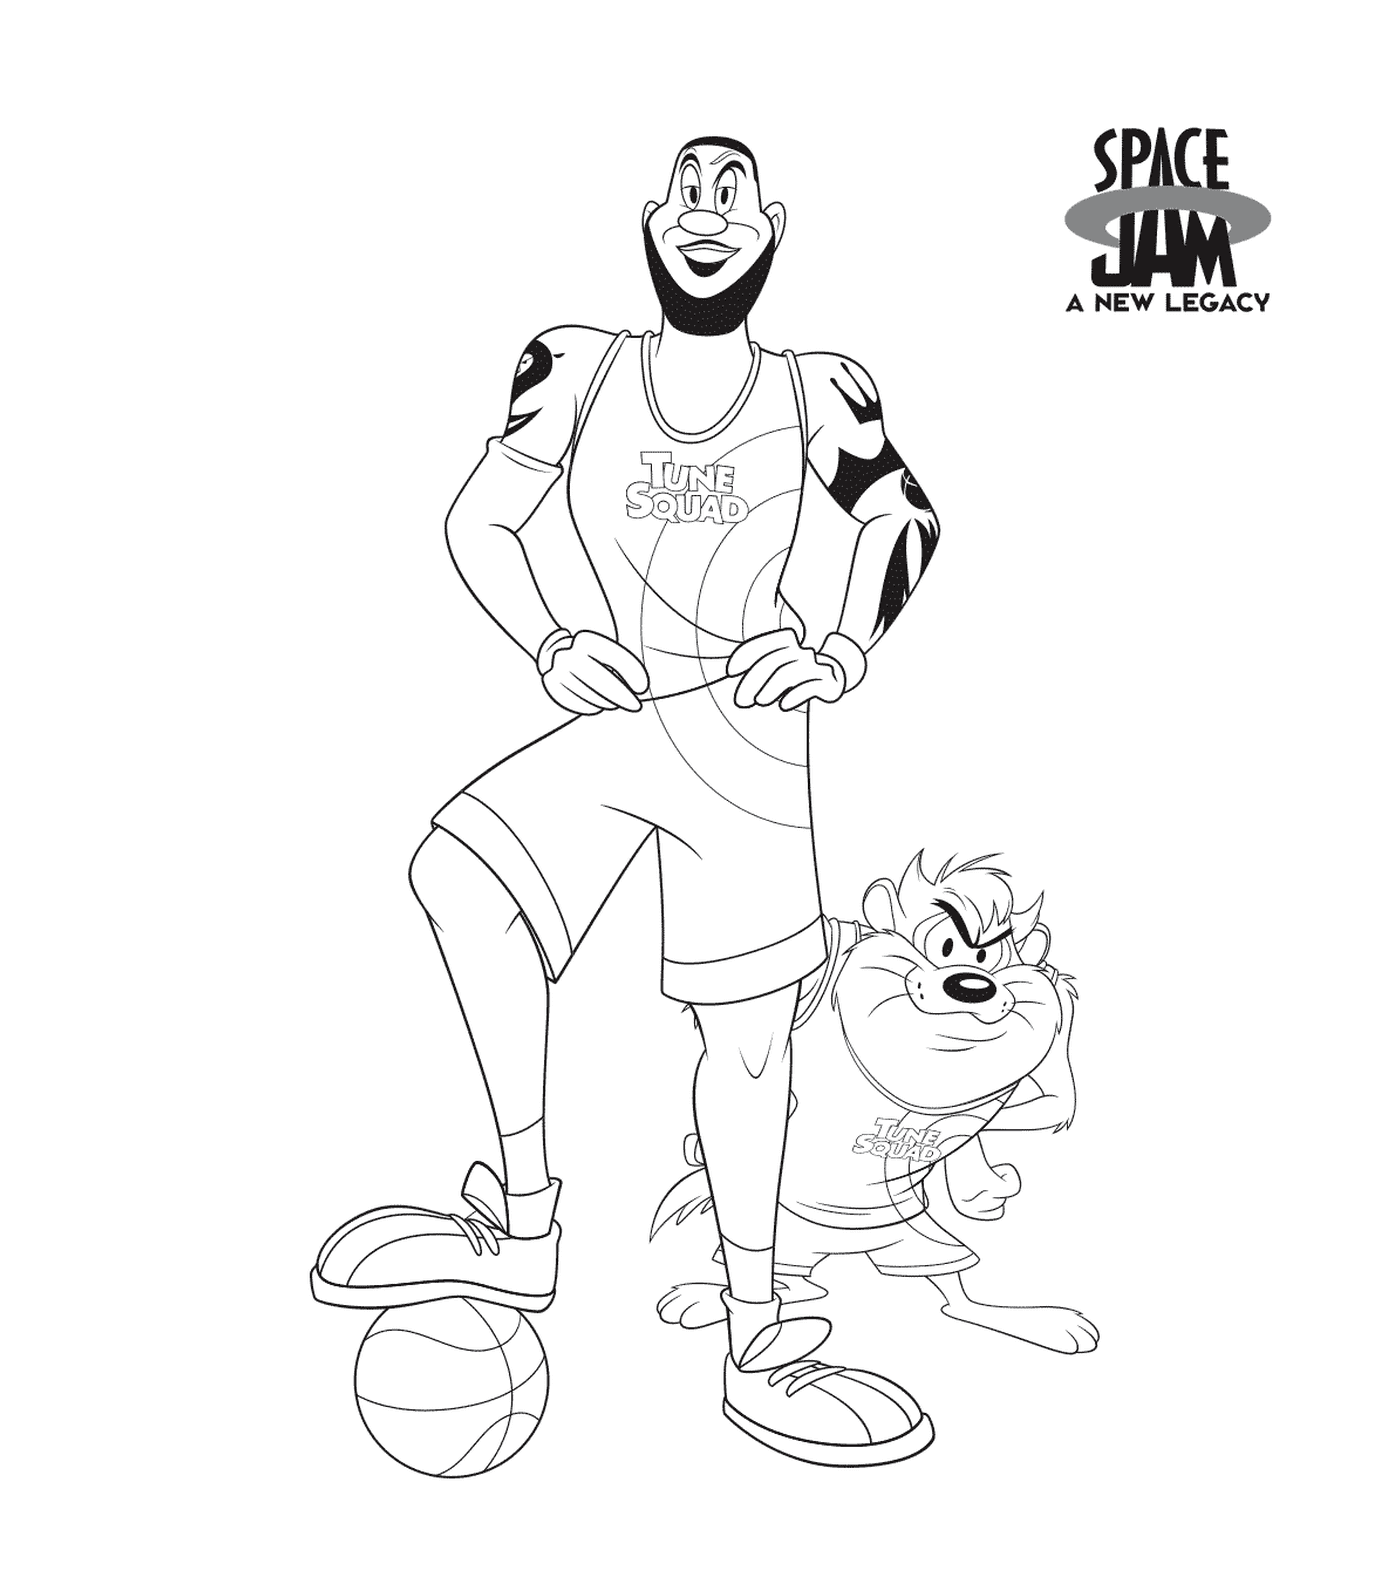  Basketball player and cat 